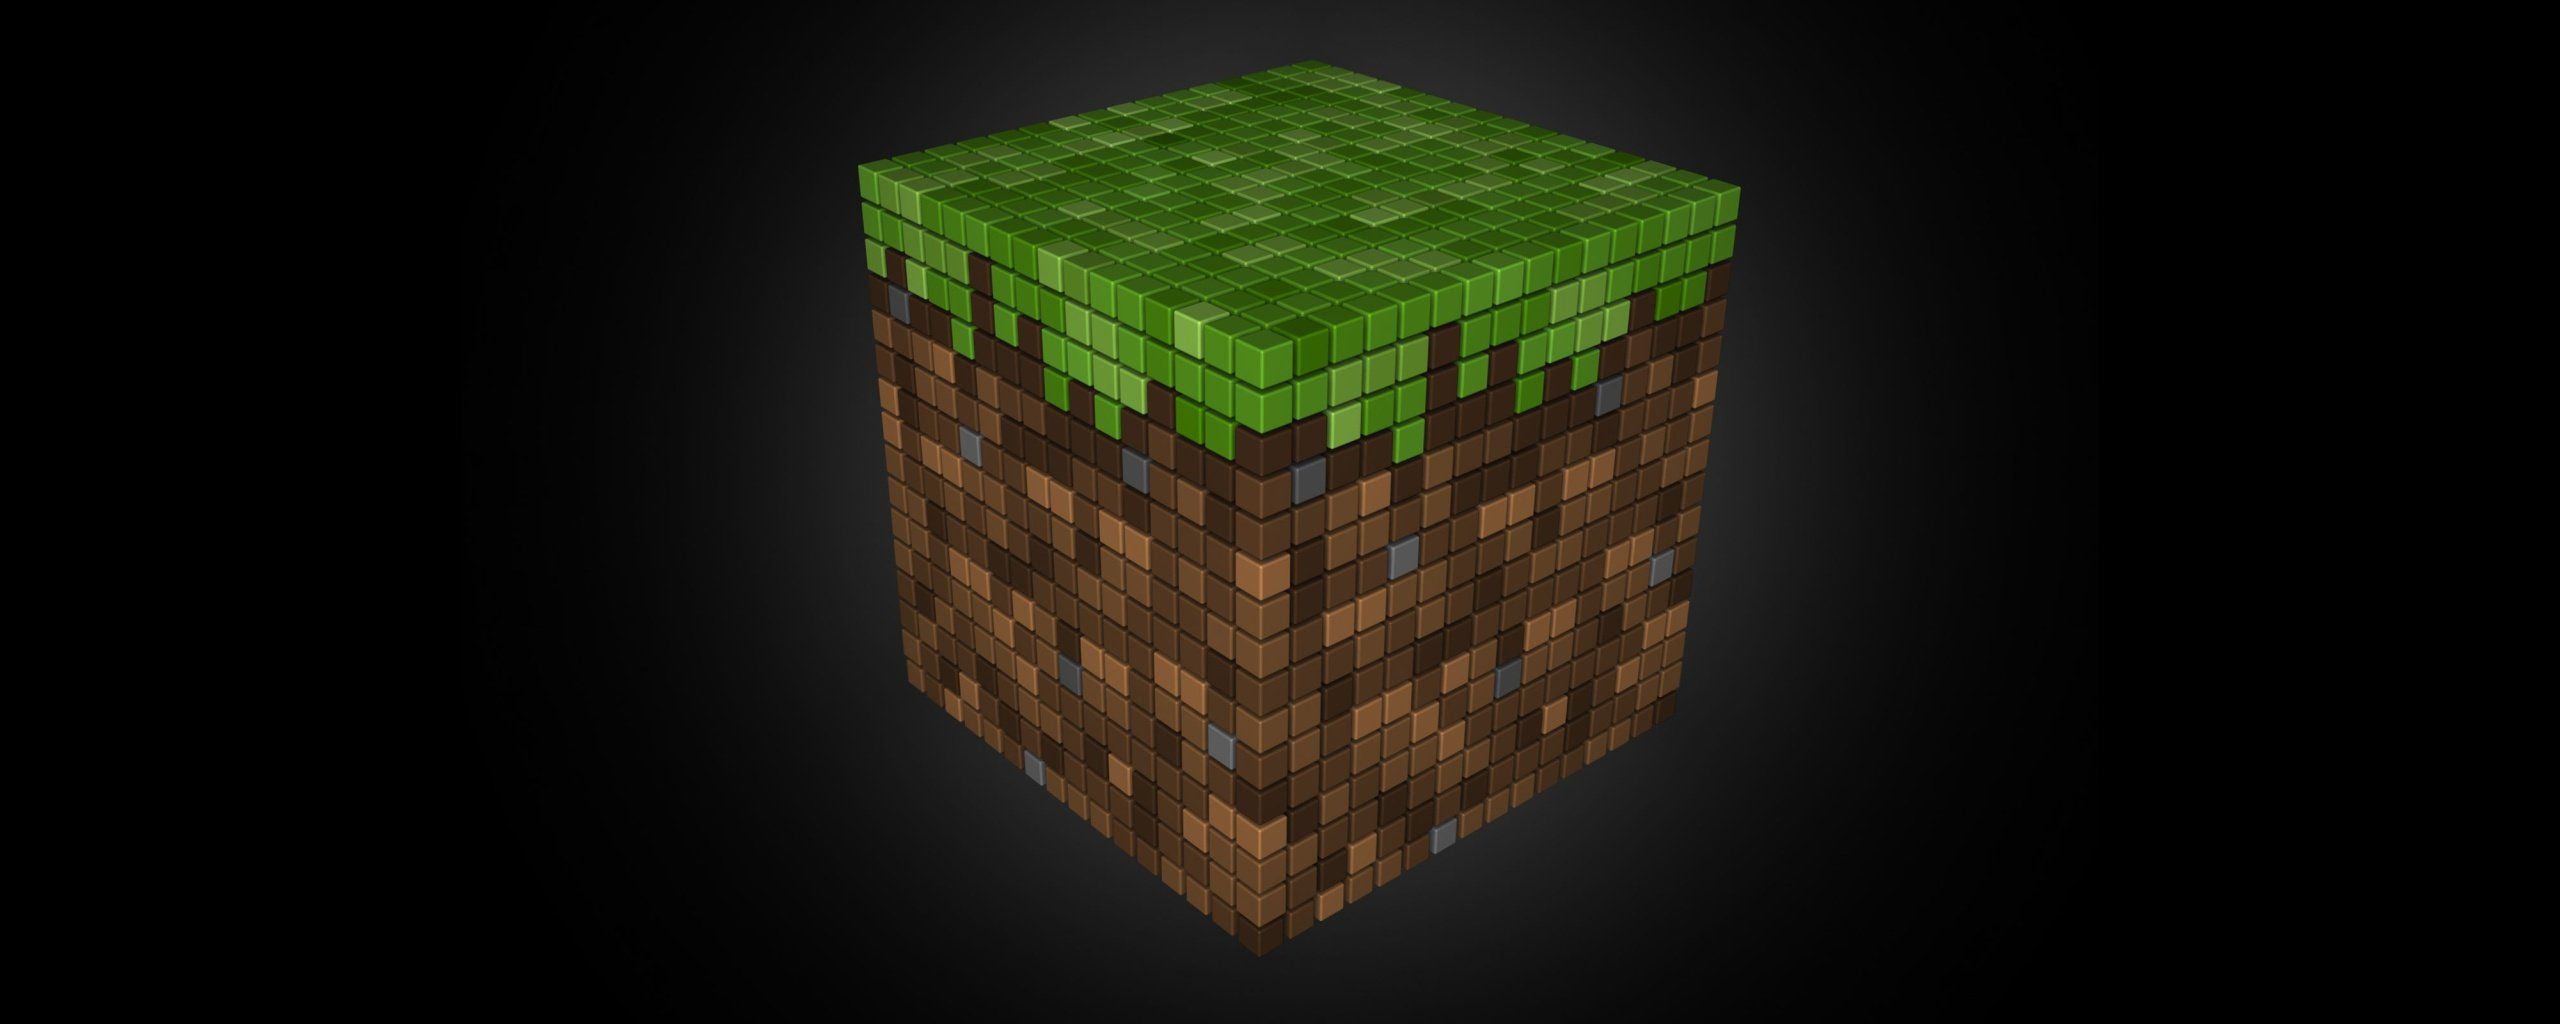 Free download blocks in certain biomes Grass is not a solid block but rather an [2560x1024] for your Desktop, Mobile & Tablet. Explore Minecraft Block Wallpaper. Best Minecraft Wallpaper